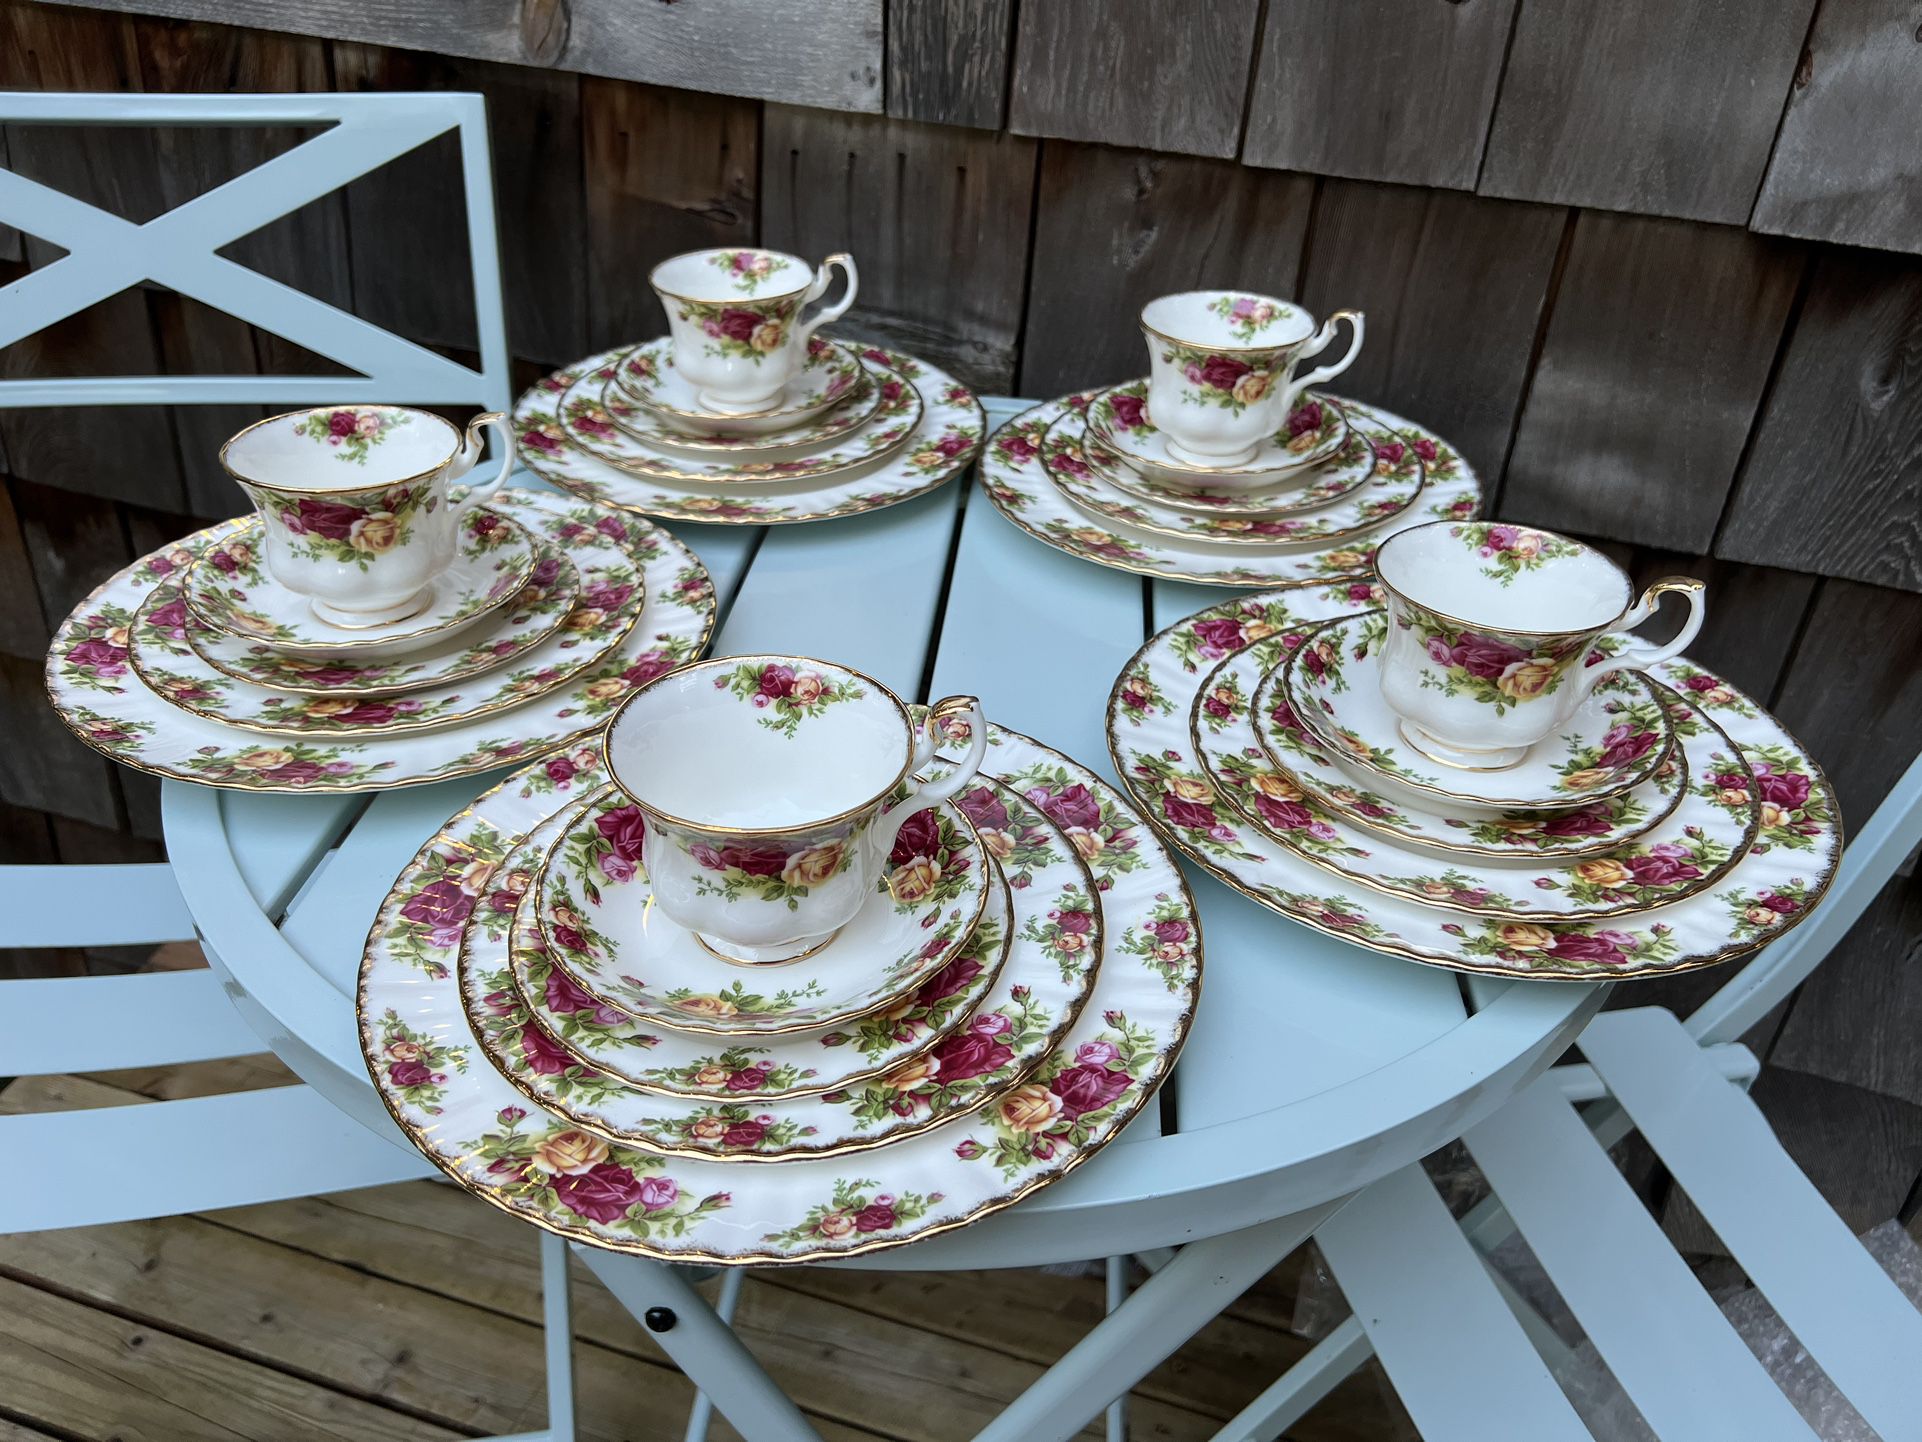 25 Piece 5 Place Settings Royal Albert Old Country Roses China